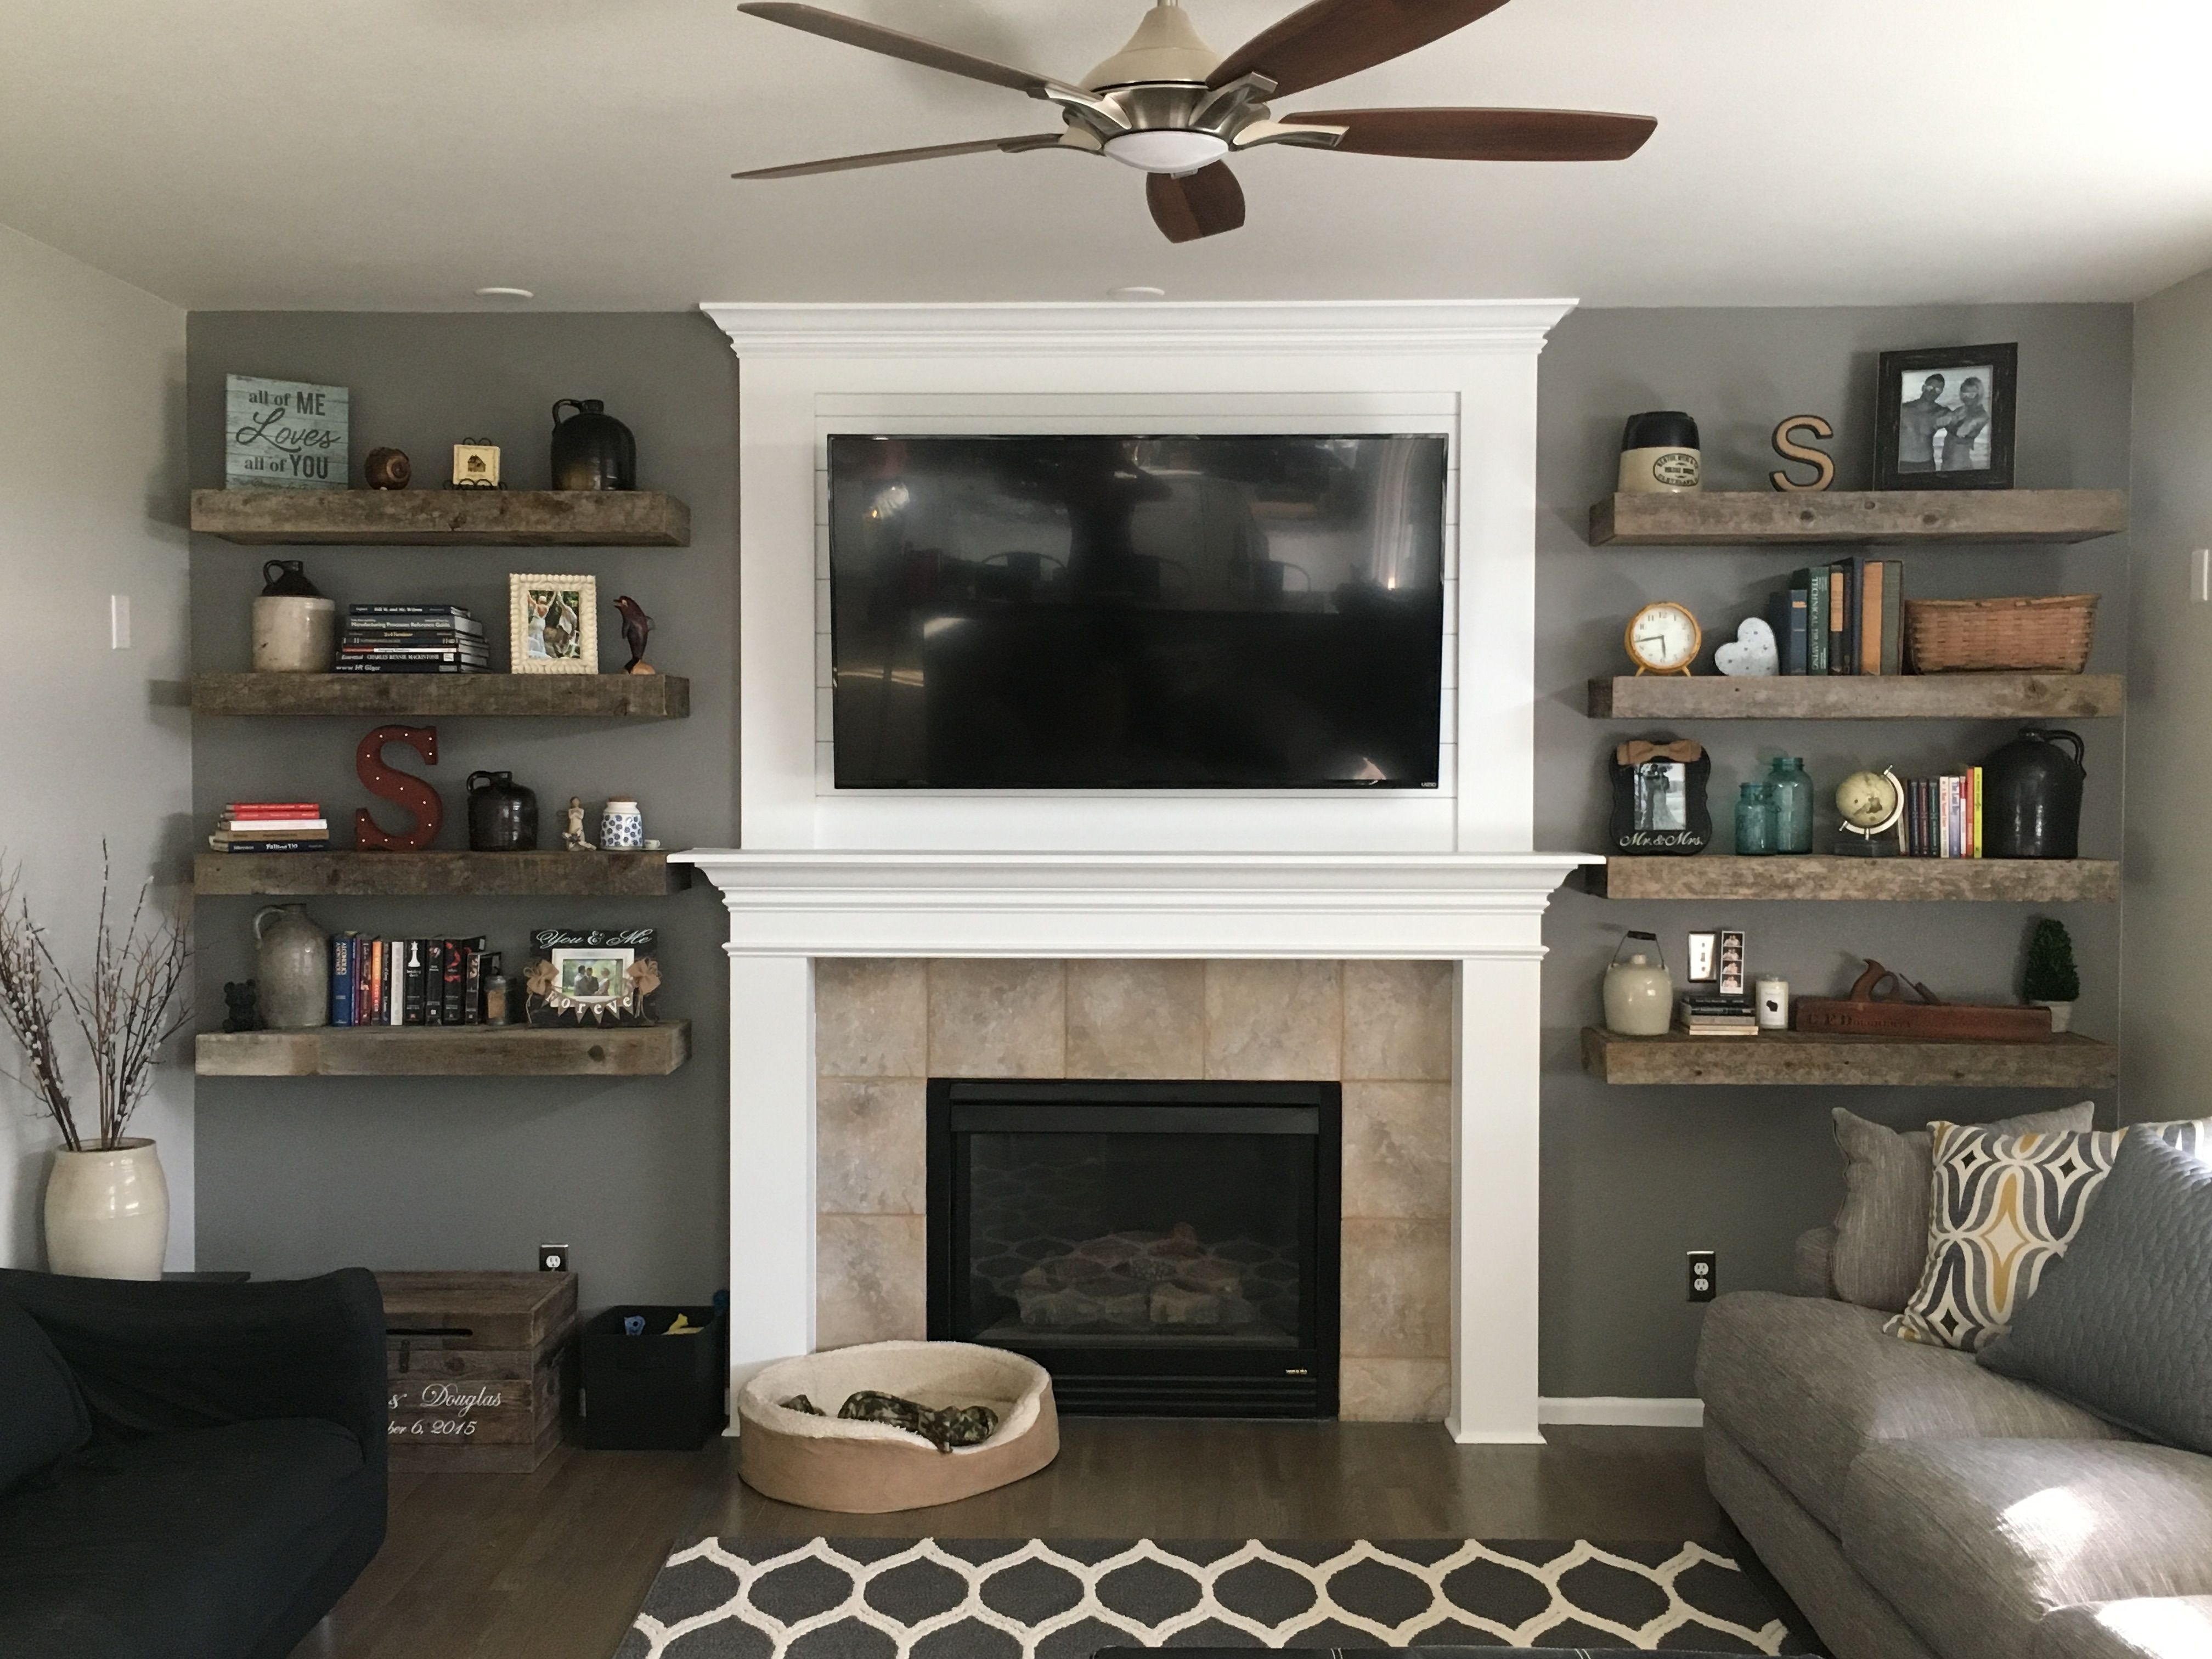 rustic living room barnwood floating shelves shiplap fireplace tures books and decor home sweet husband did the metal shelving hardware entryway coat rack upper cabinet design